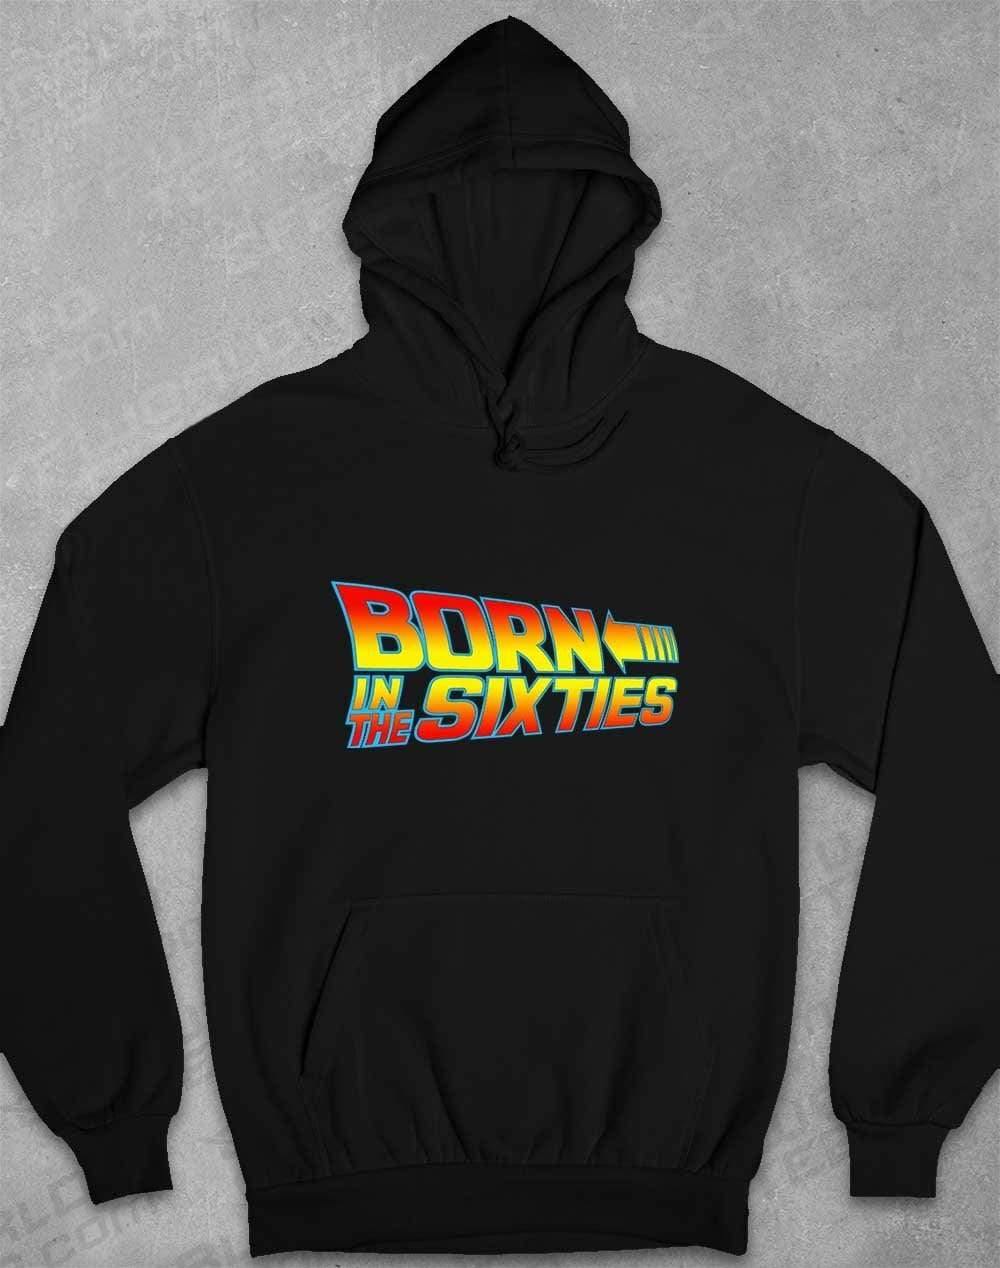 Born in the... (CHOOSE YOUR DECADE!) Hoodie 1960s - Black / S  - Off World Tees